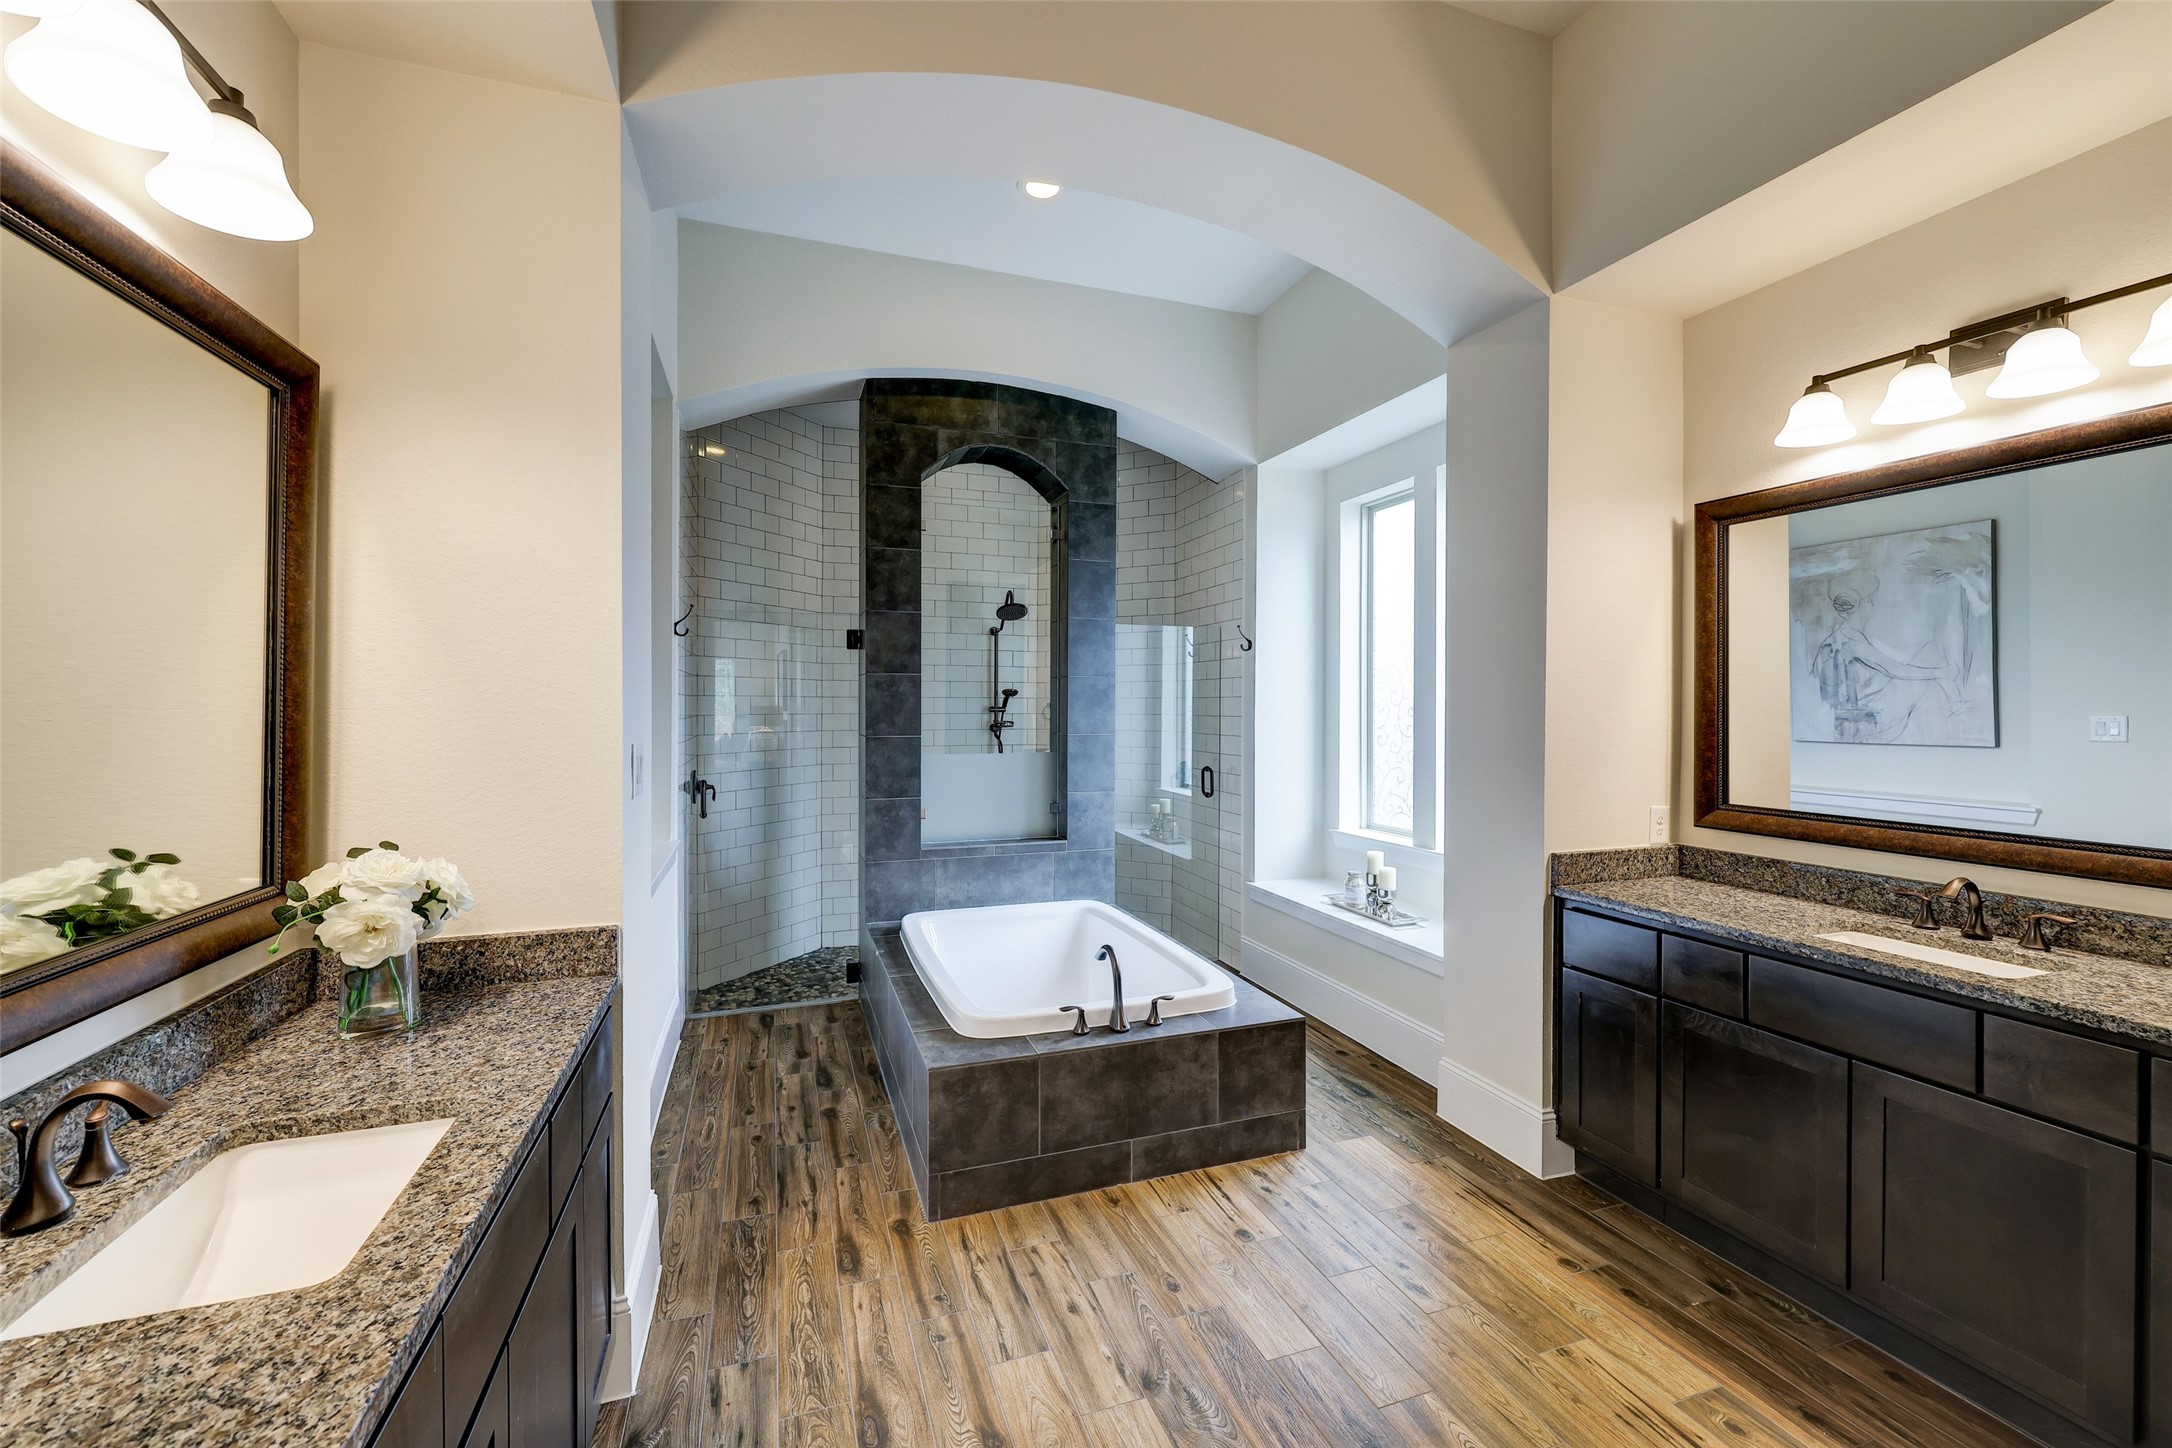 Experience spa-like luxury in the ensuite, featuring dual vanities, a soaking tub, and a frameless dual shower for a daily escape.